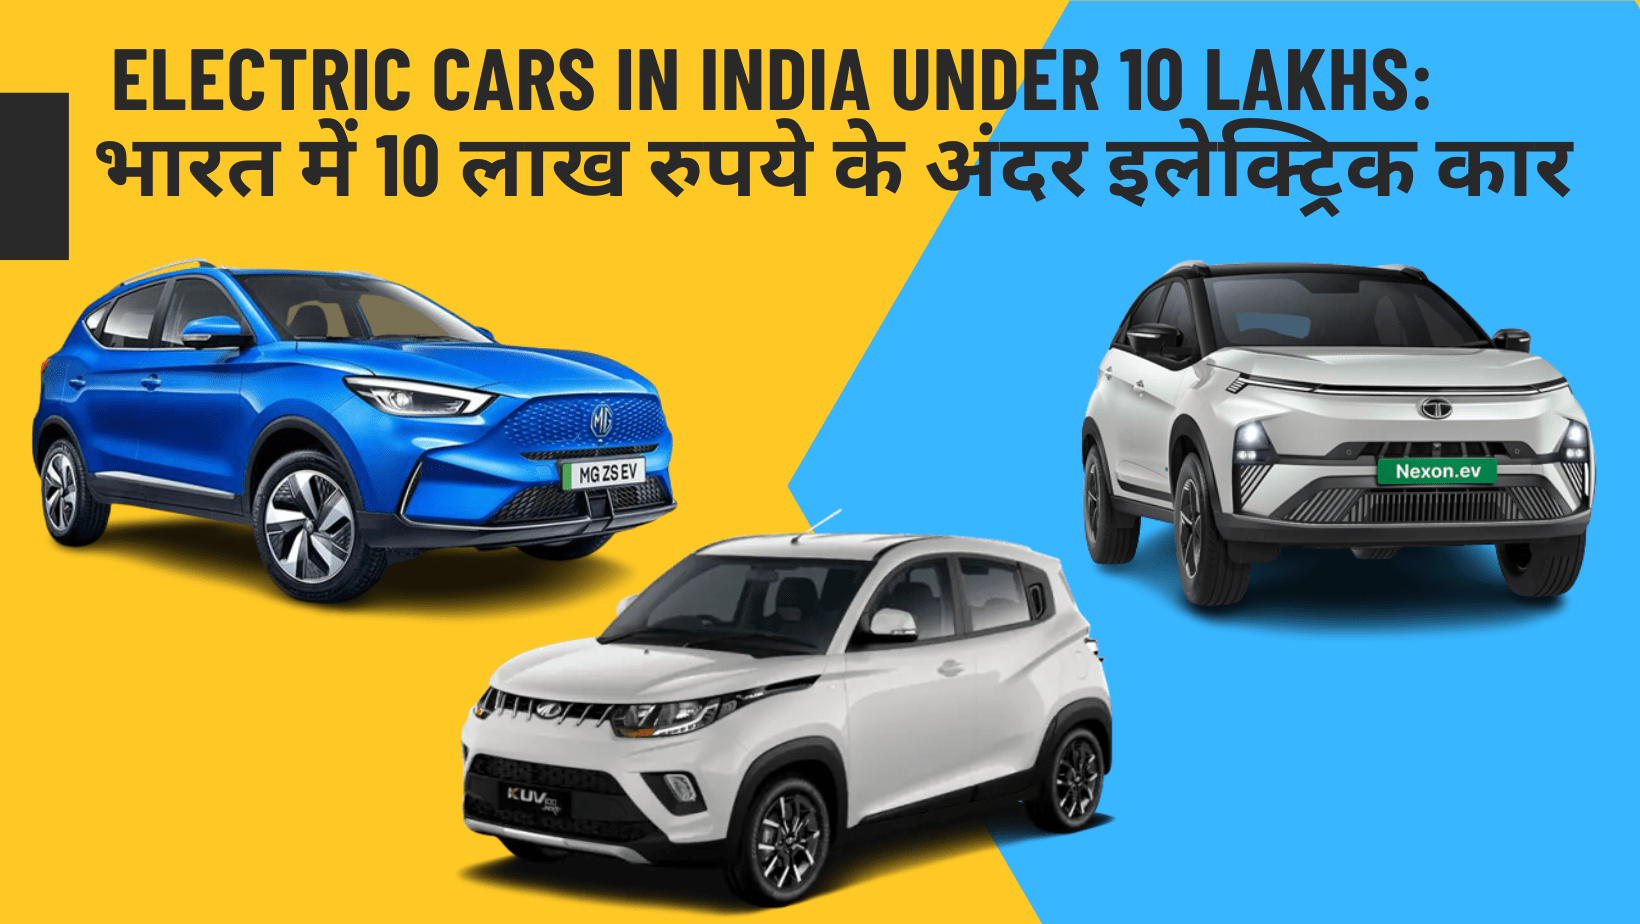 Electric Cars in india under 10 lakhs